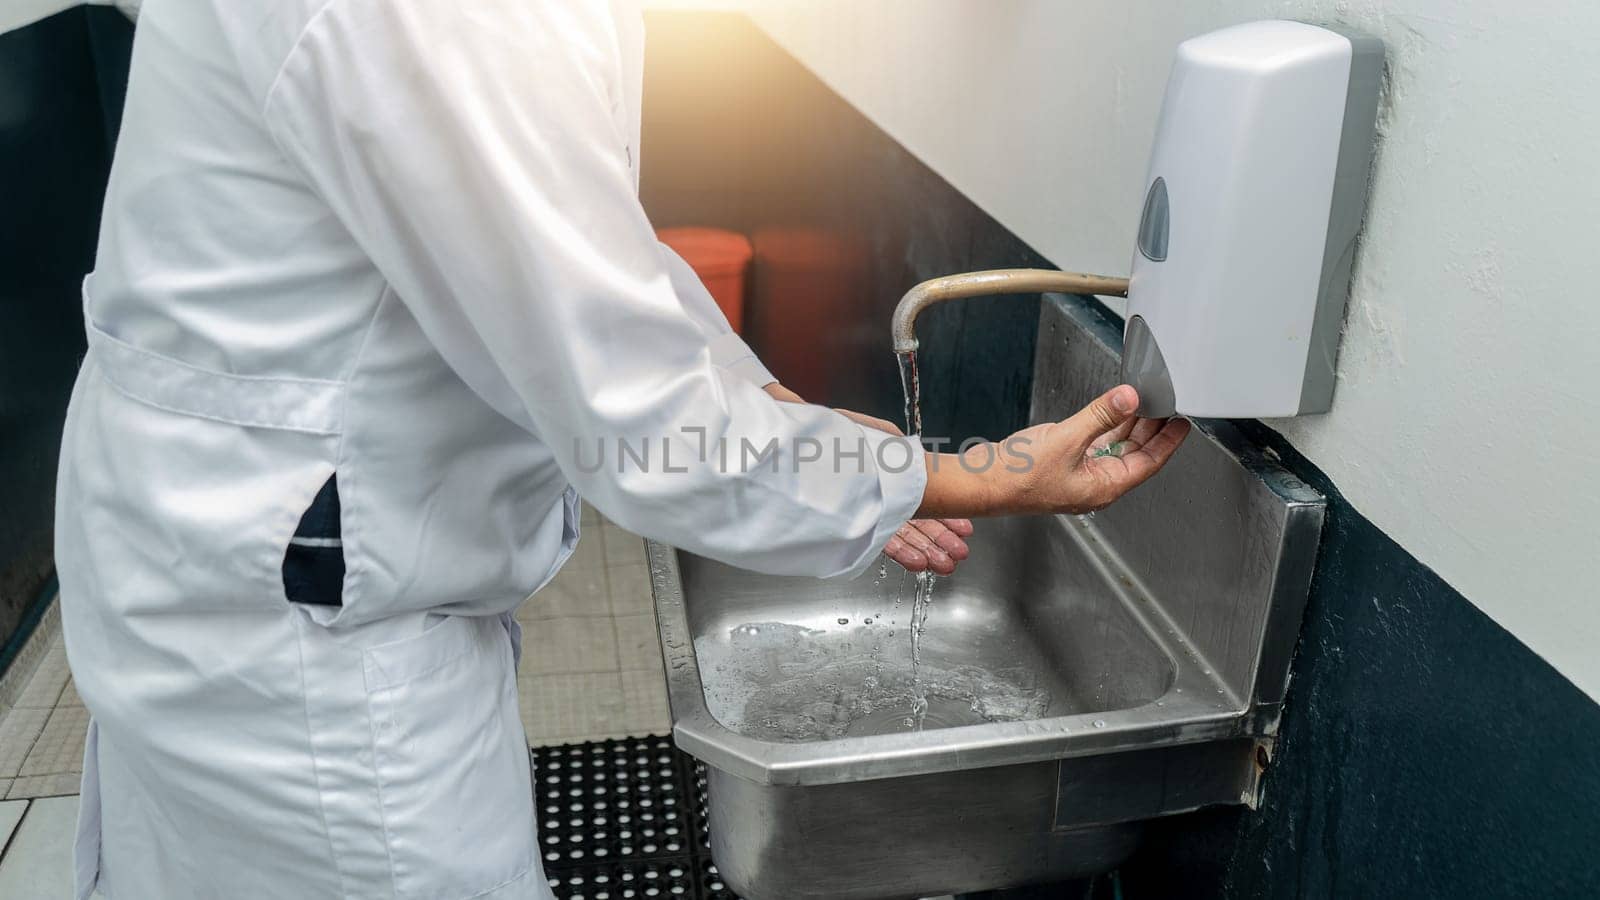 Engineer working in a food plant sanitizing his hands before starting the production process